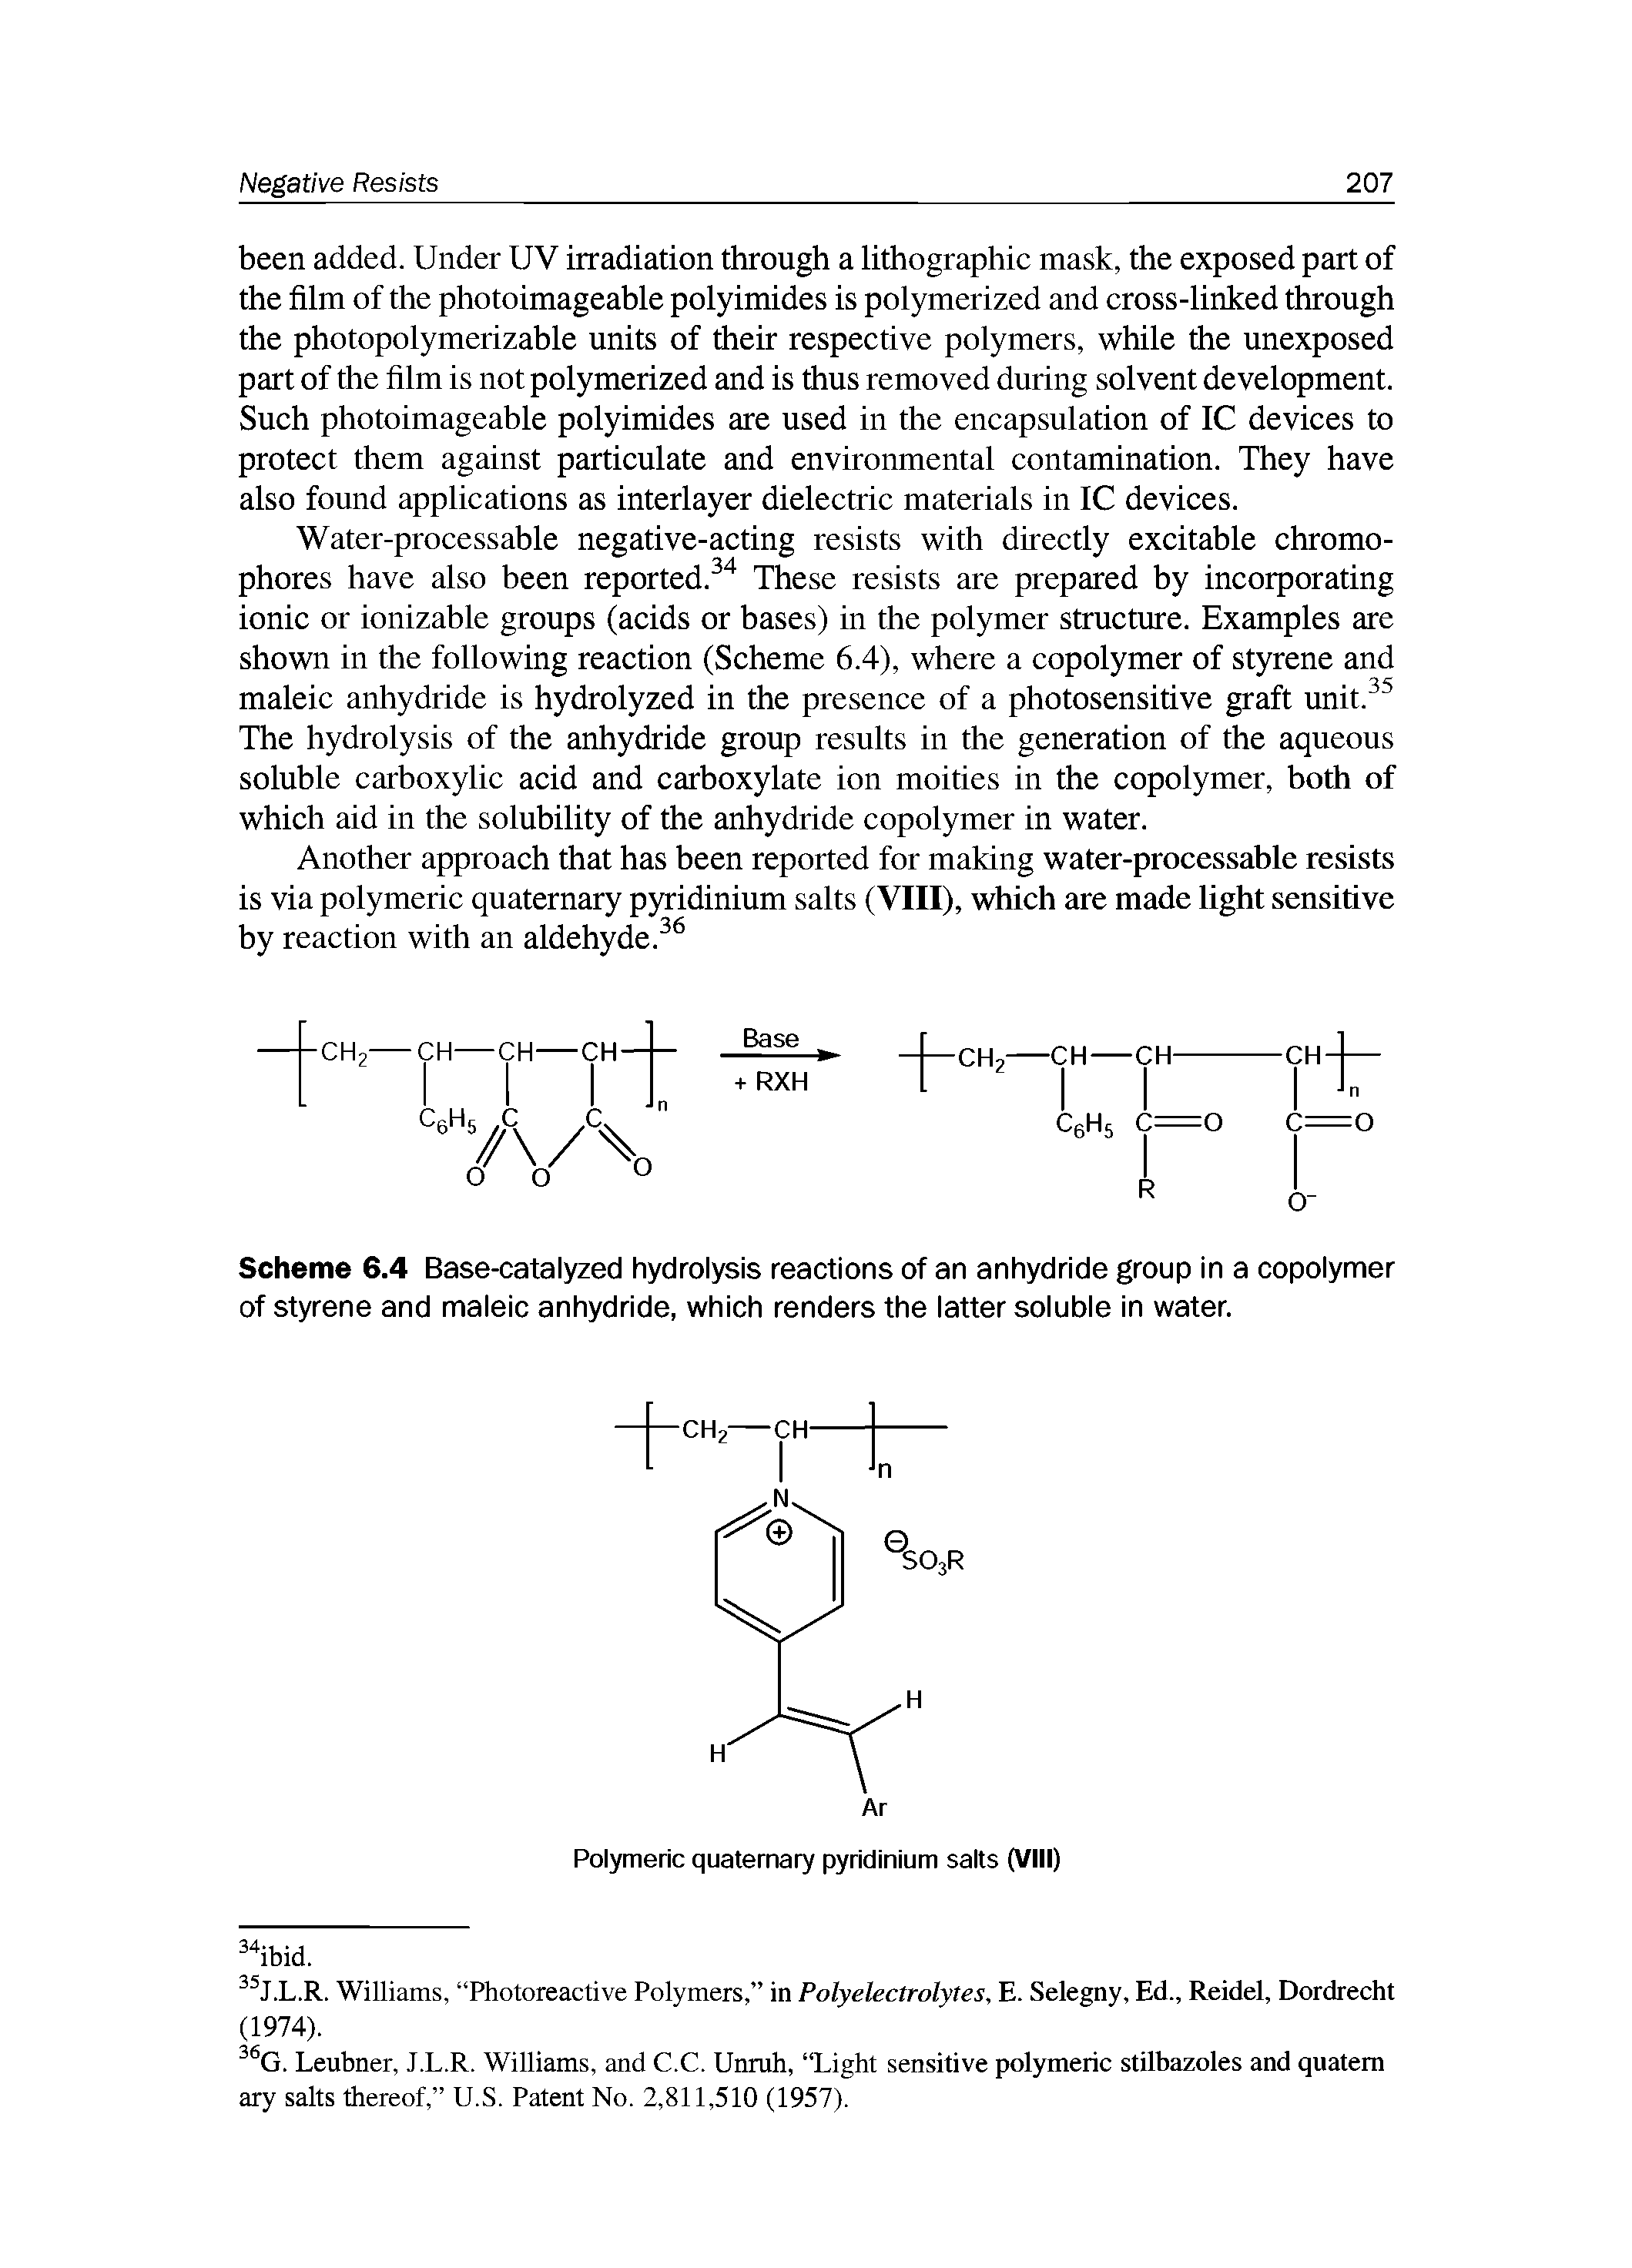 Scheme 6.4 Base-catalyzed hydrolysis reactions of an anhydride group in a copolymer of styrene and maleic anhydride, which renders the latter soluble in water.